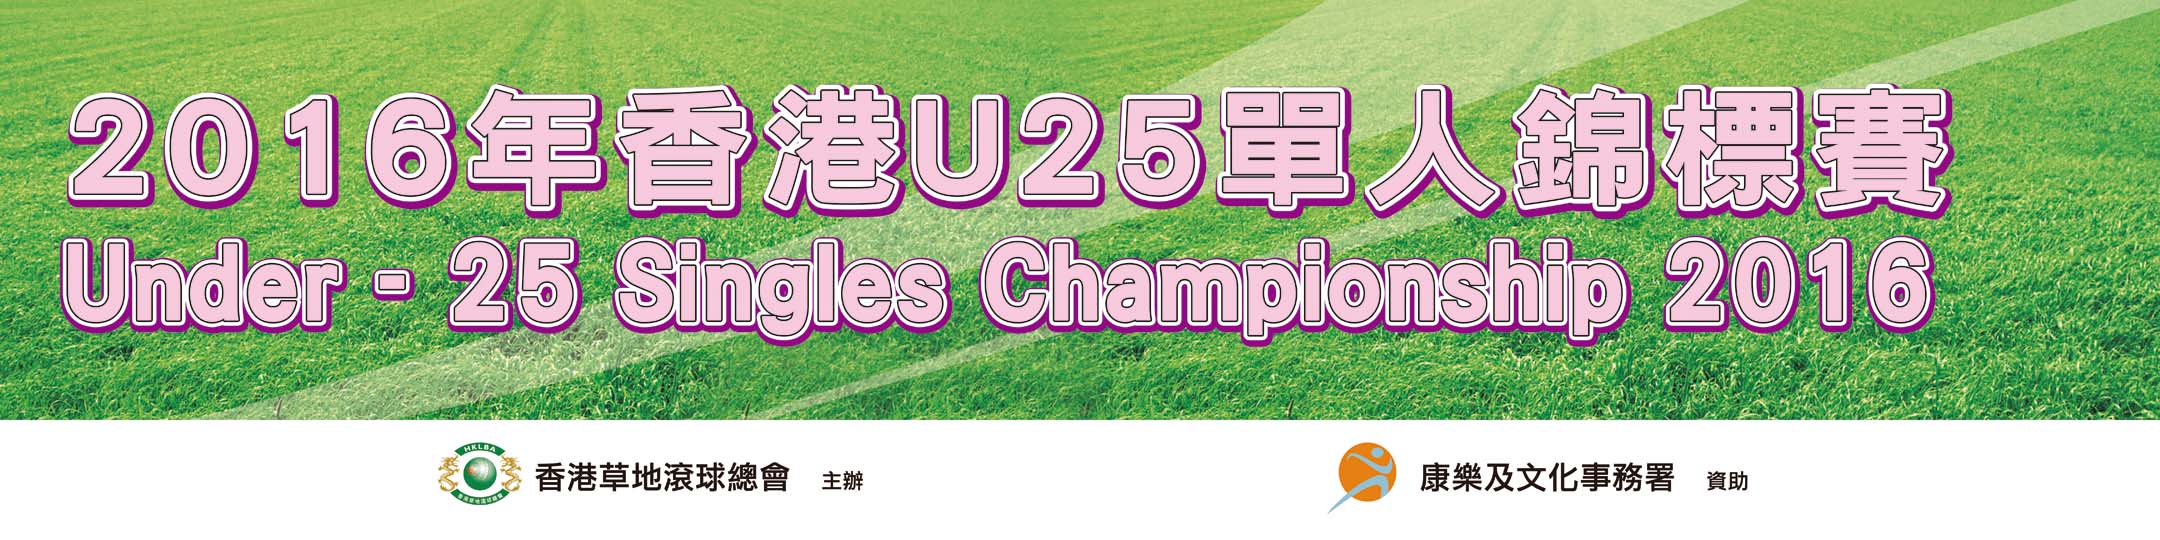 Under-25 Singles Championship 2016 (Updated on 16/11/16)